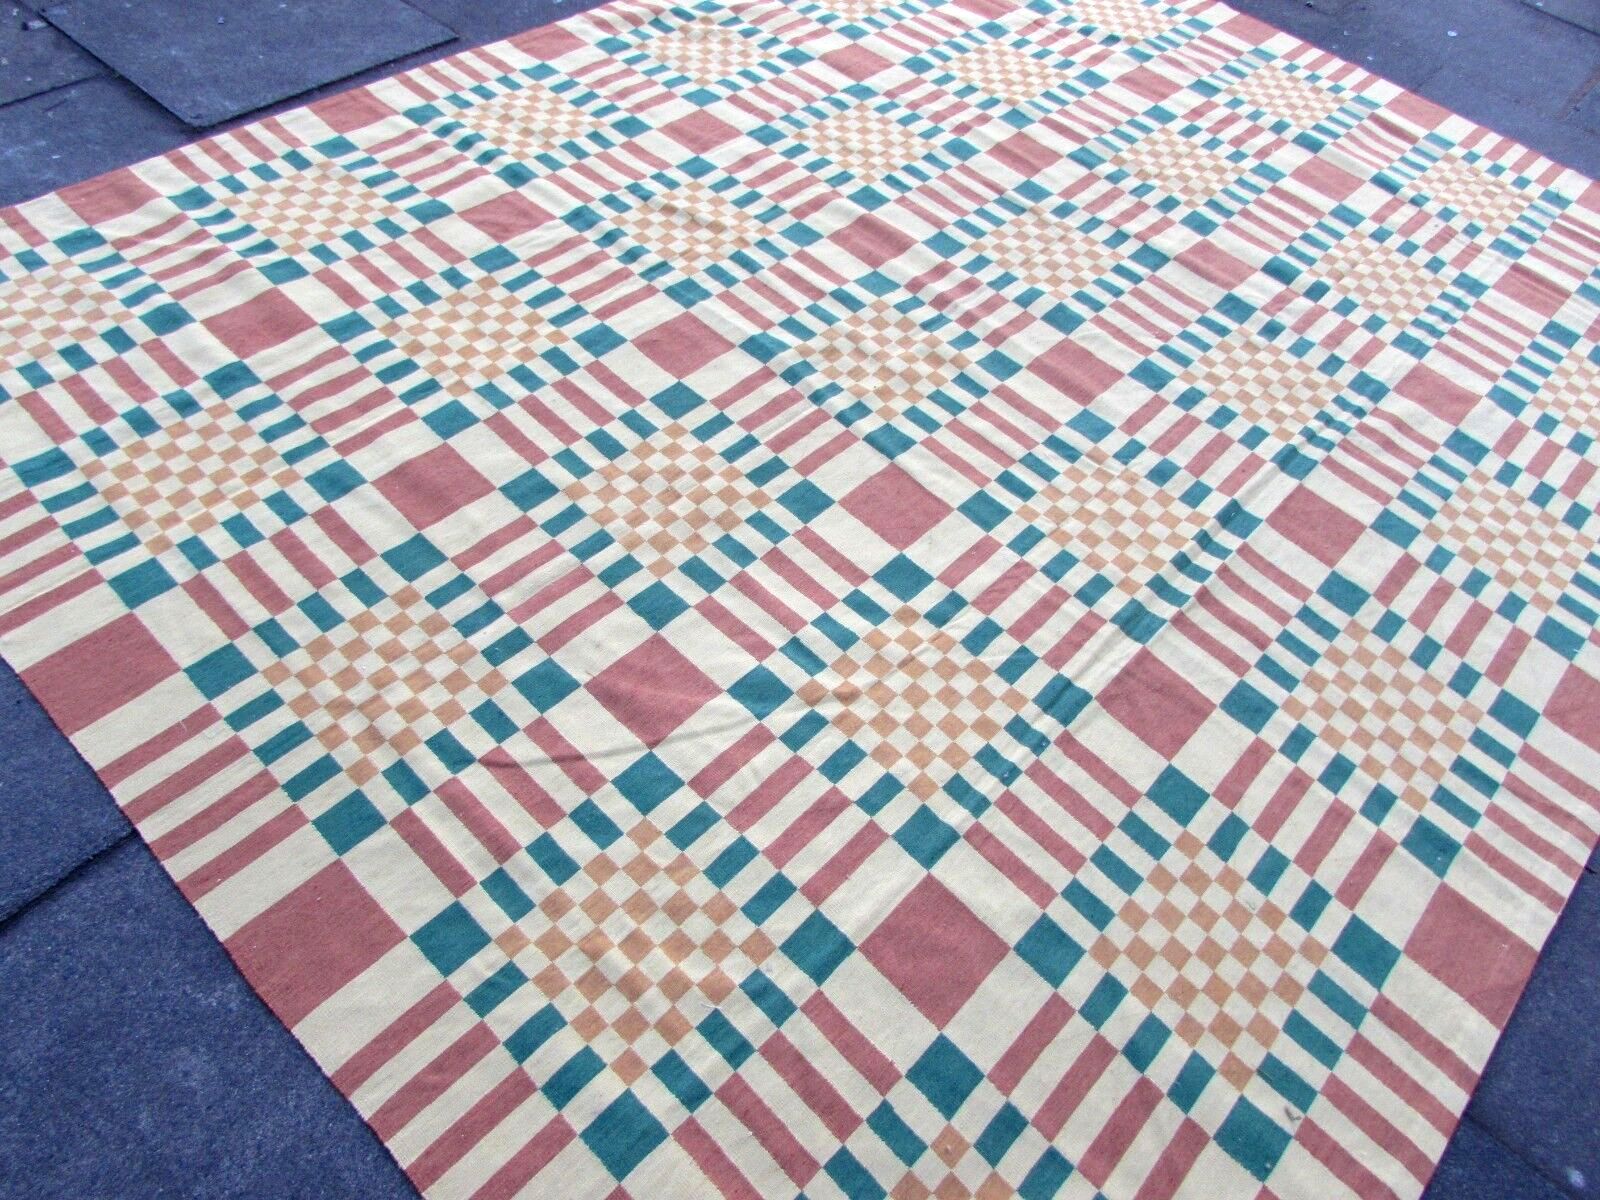 Detailed View of Vintage French Aubusson Rug - Geometric Design with Colorful Squares - Handmade Wool Rug from France - Circa 1970s - Beige, Turquoise, and Rose Colors